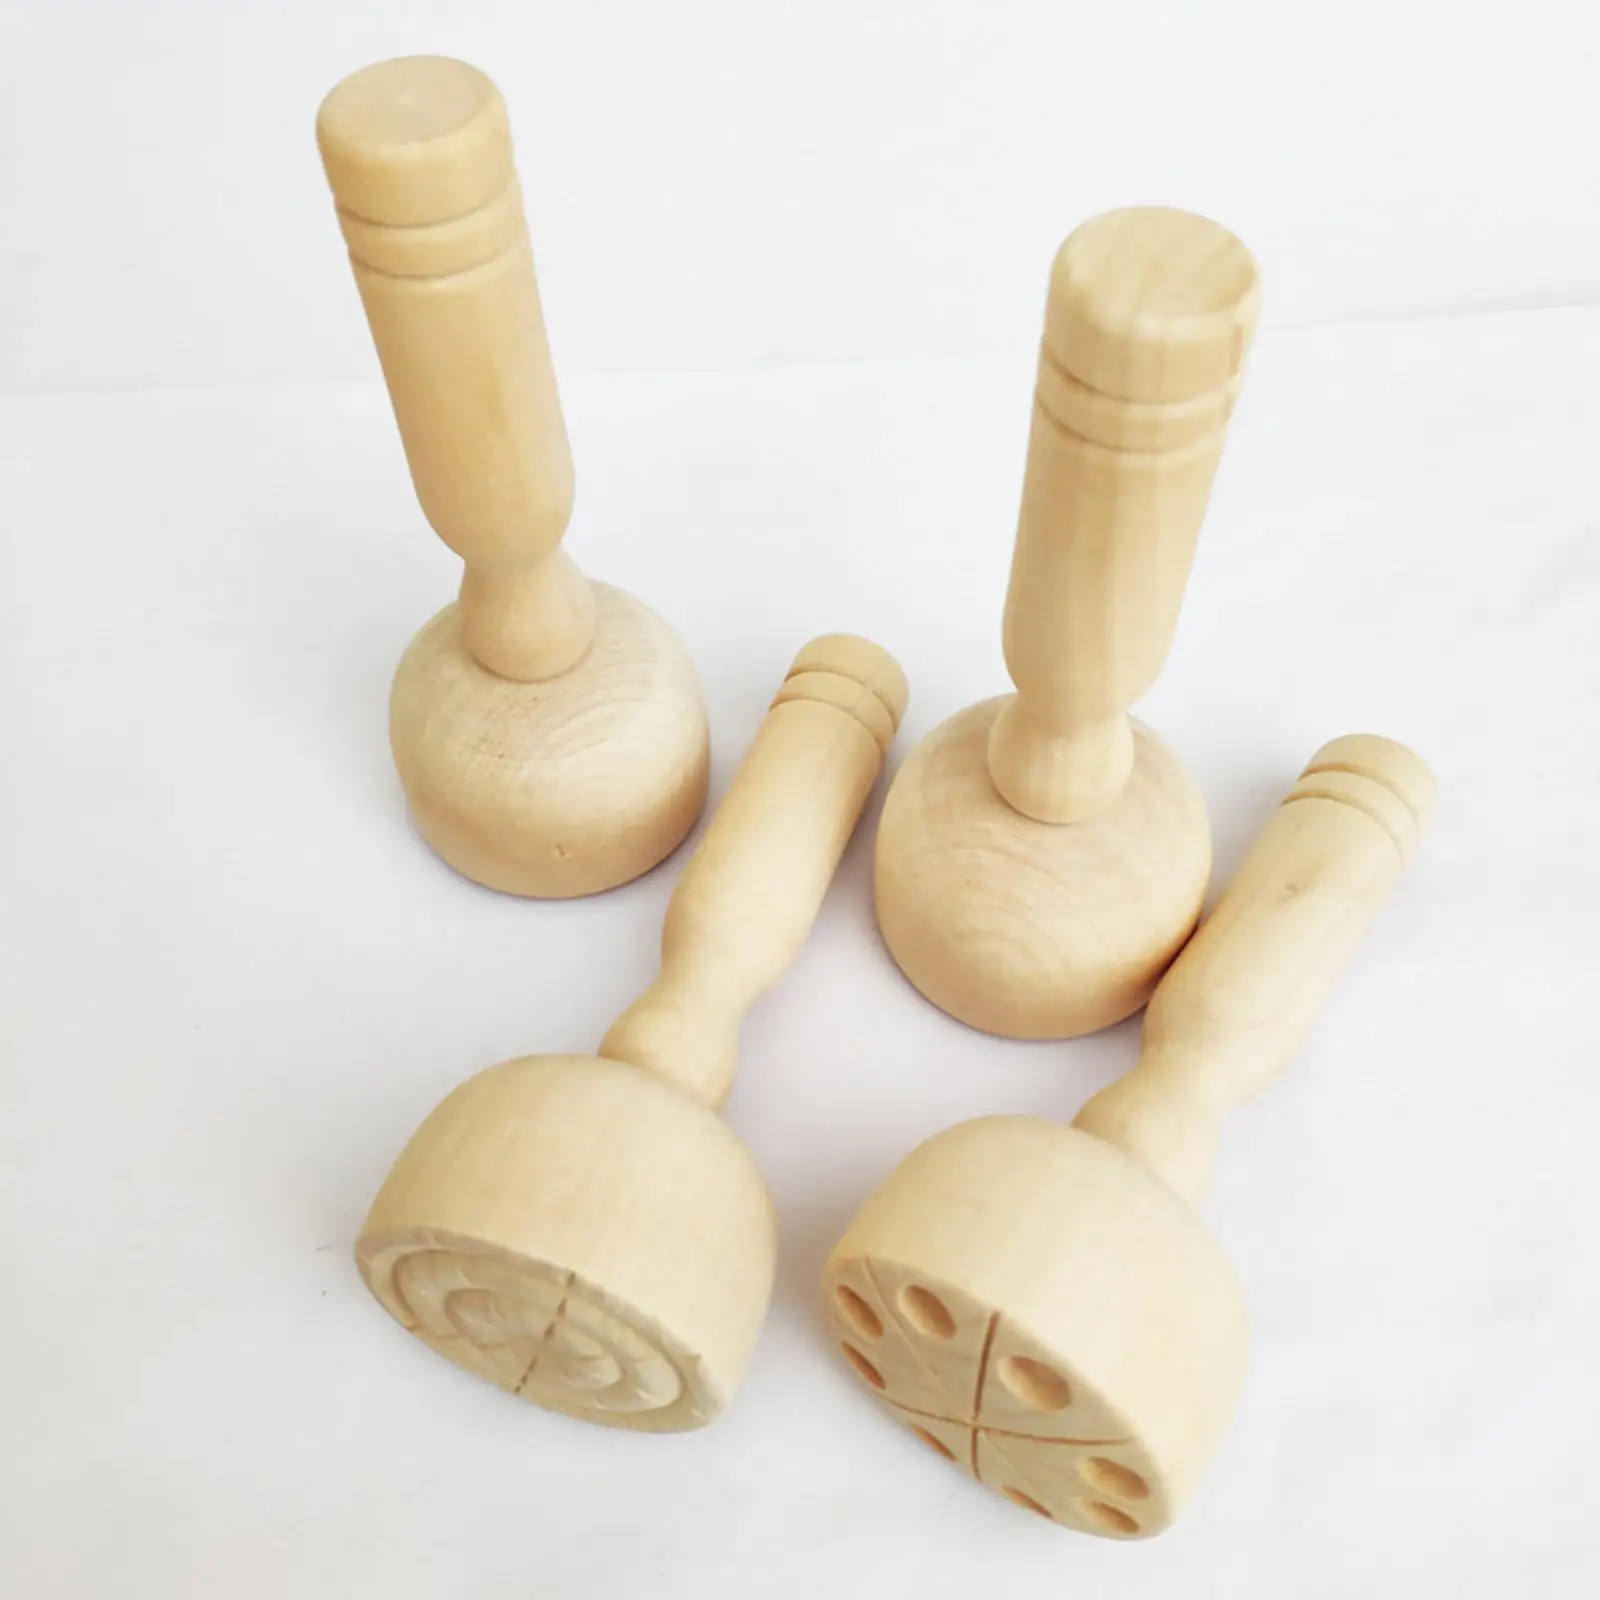 4Pcs Traditional Wooden seal Moulds Making Molds Press Molds Tools mould Supplies for Art Craft Activity Supplies